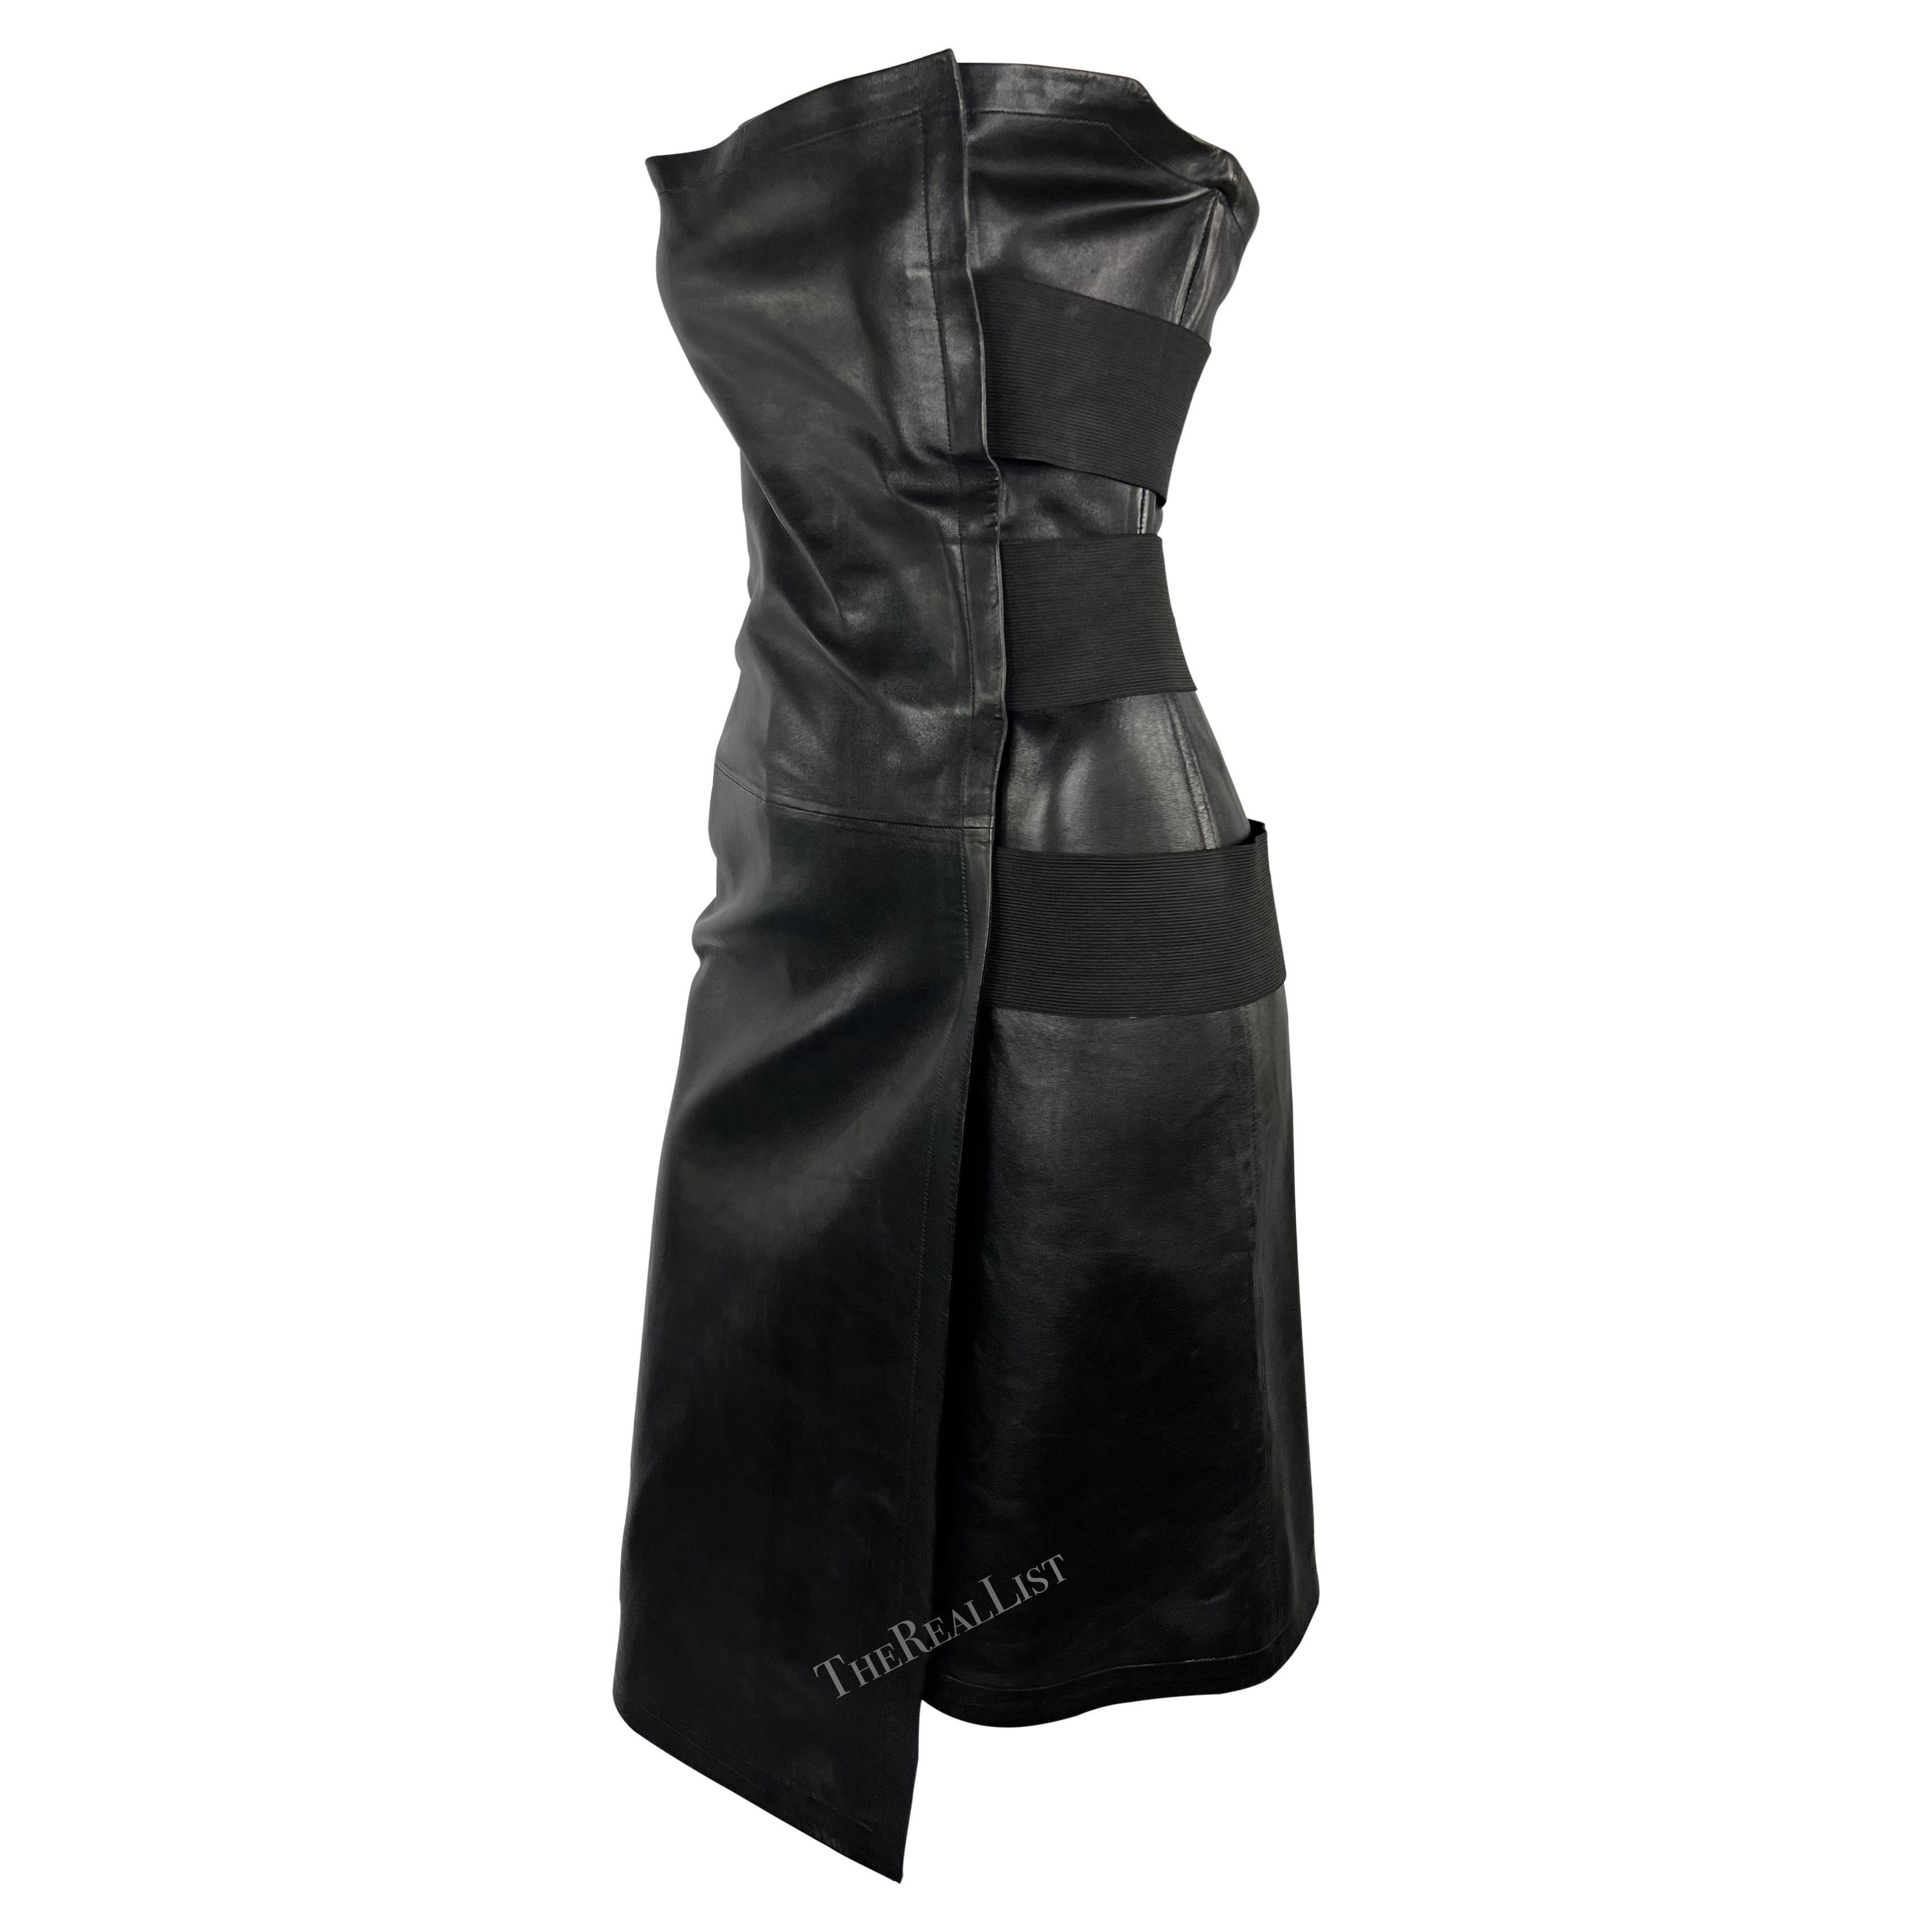 S/S 2001 Yves Saint Laurent by Tom Ford Black Leather Strapless Bandage Dress For Sale